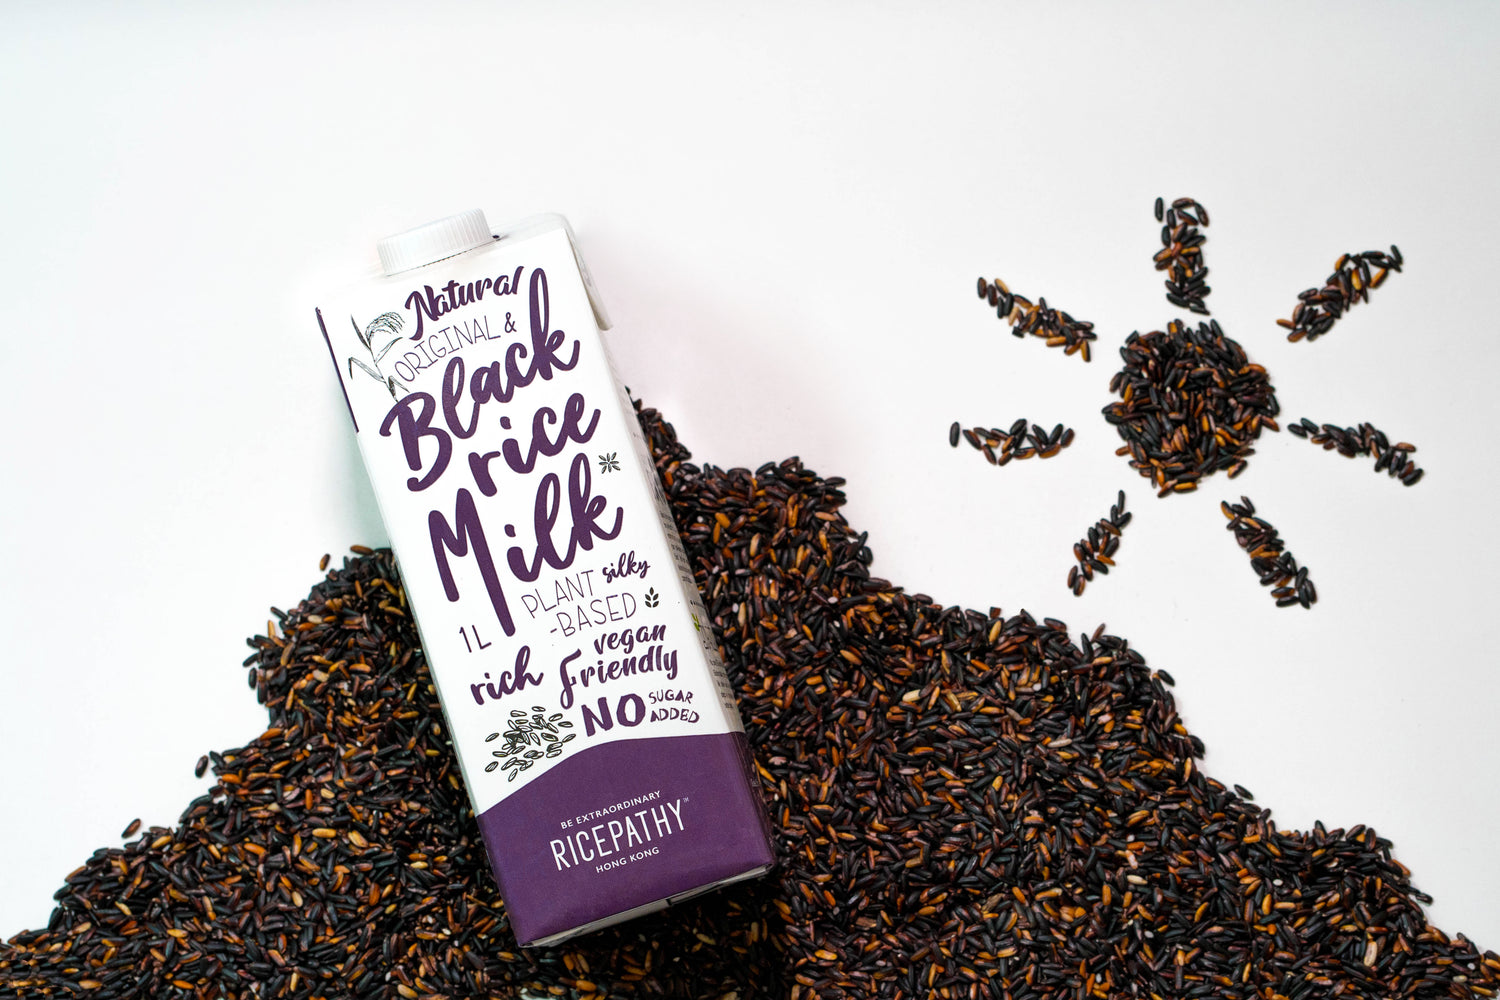 RICEPATHY black rice milk with a bunch of black rice